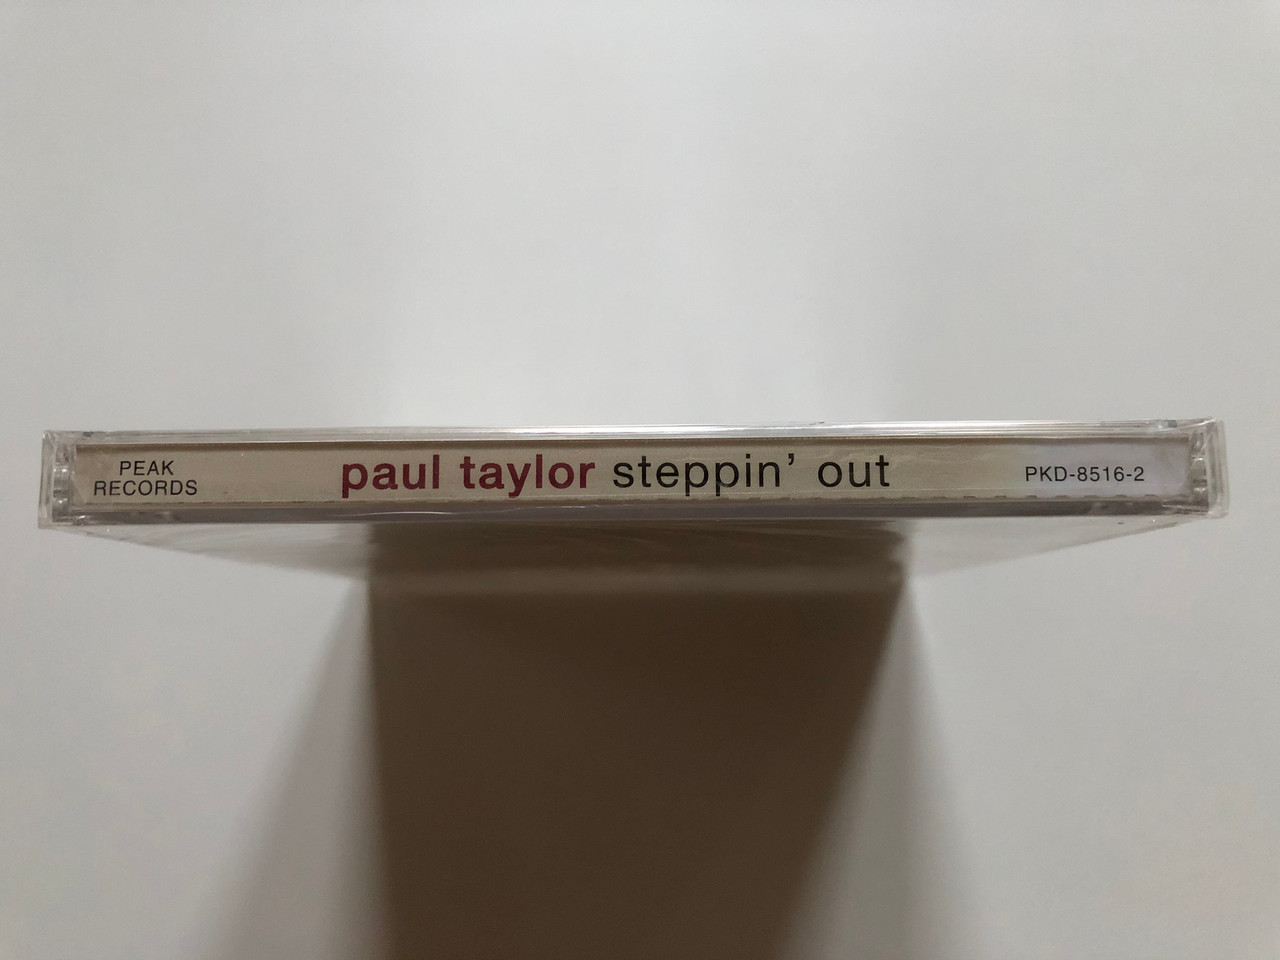 https://cdn10.bigcommerce.com/s-62bdpkt7pb/products/0/images/214180/Paul_Taylor_Steppin_Out_The_Contemporary_Jazz_Icon_is_back_with_a_vengeance_as_he_mixes_his_signature_smooth_sound_with_RB_funk_grooves_for_an_exceptional_CD_Peak_Records_Audio_C_3__38828.1645708934.1280.1280.JPG?c=2&_gl=1*tas5o1*_ga*MjA2NTIxMjE2MC4xNTkwNTEyNTMy*_ga_WS2VZYPC6G*MTY0NTcwNzQzNS4zMDAuMS4xNjQ1NzA4NzIyLjM2